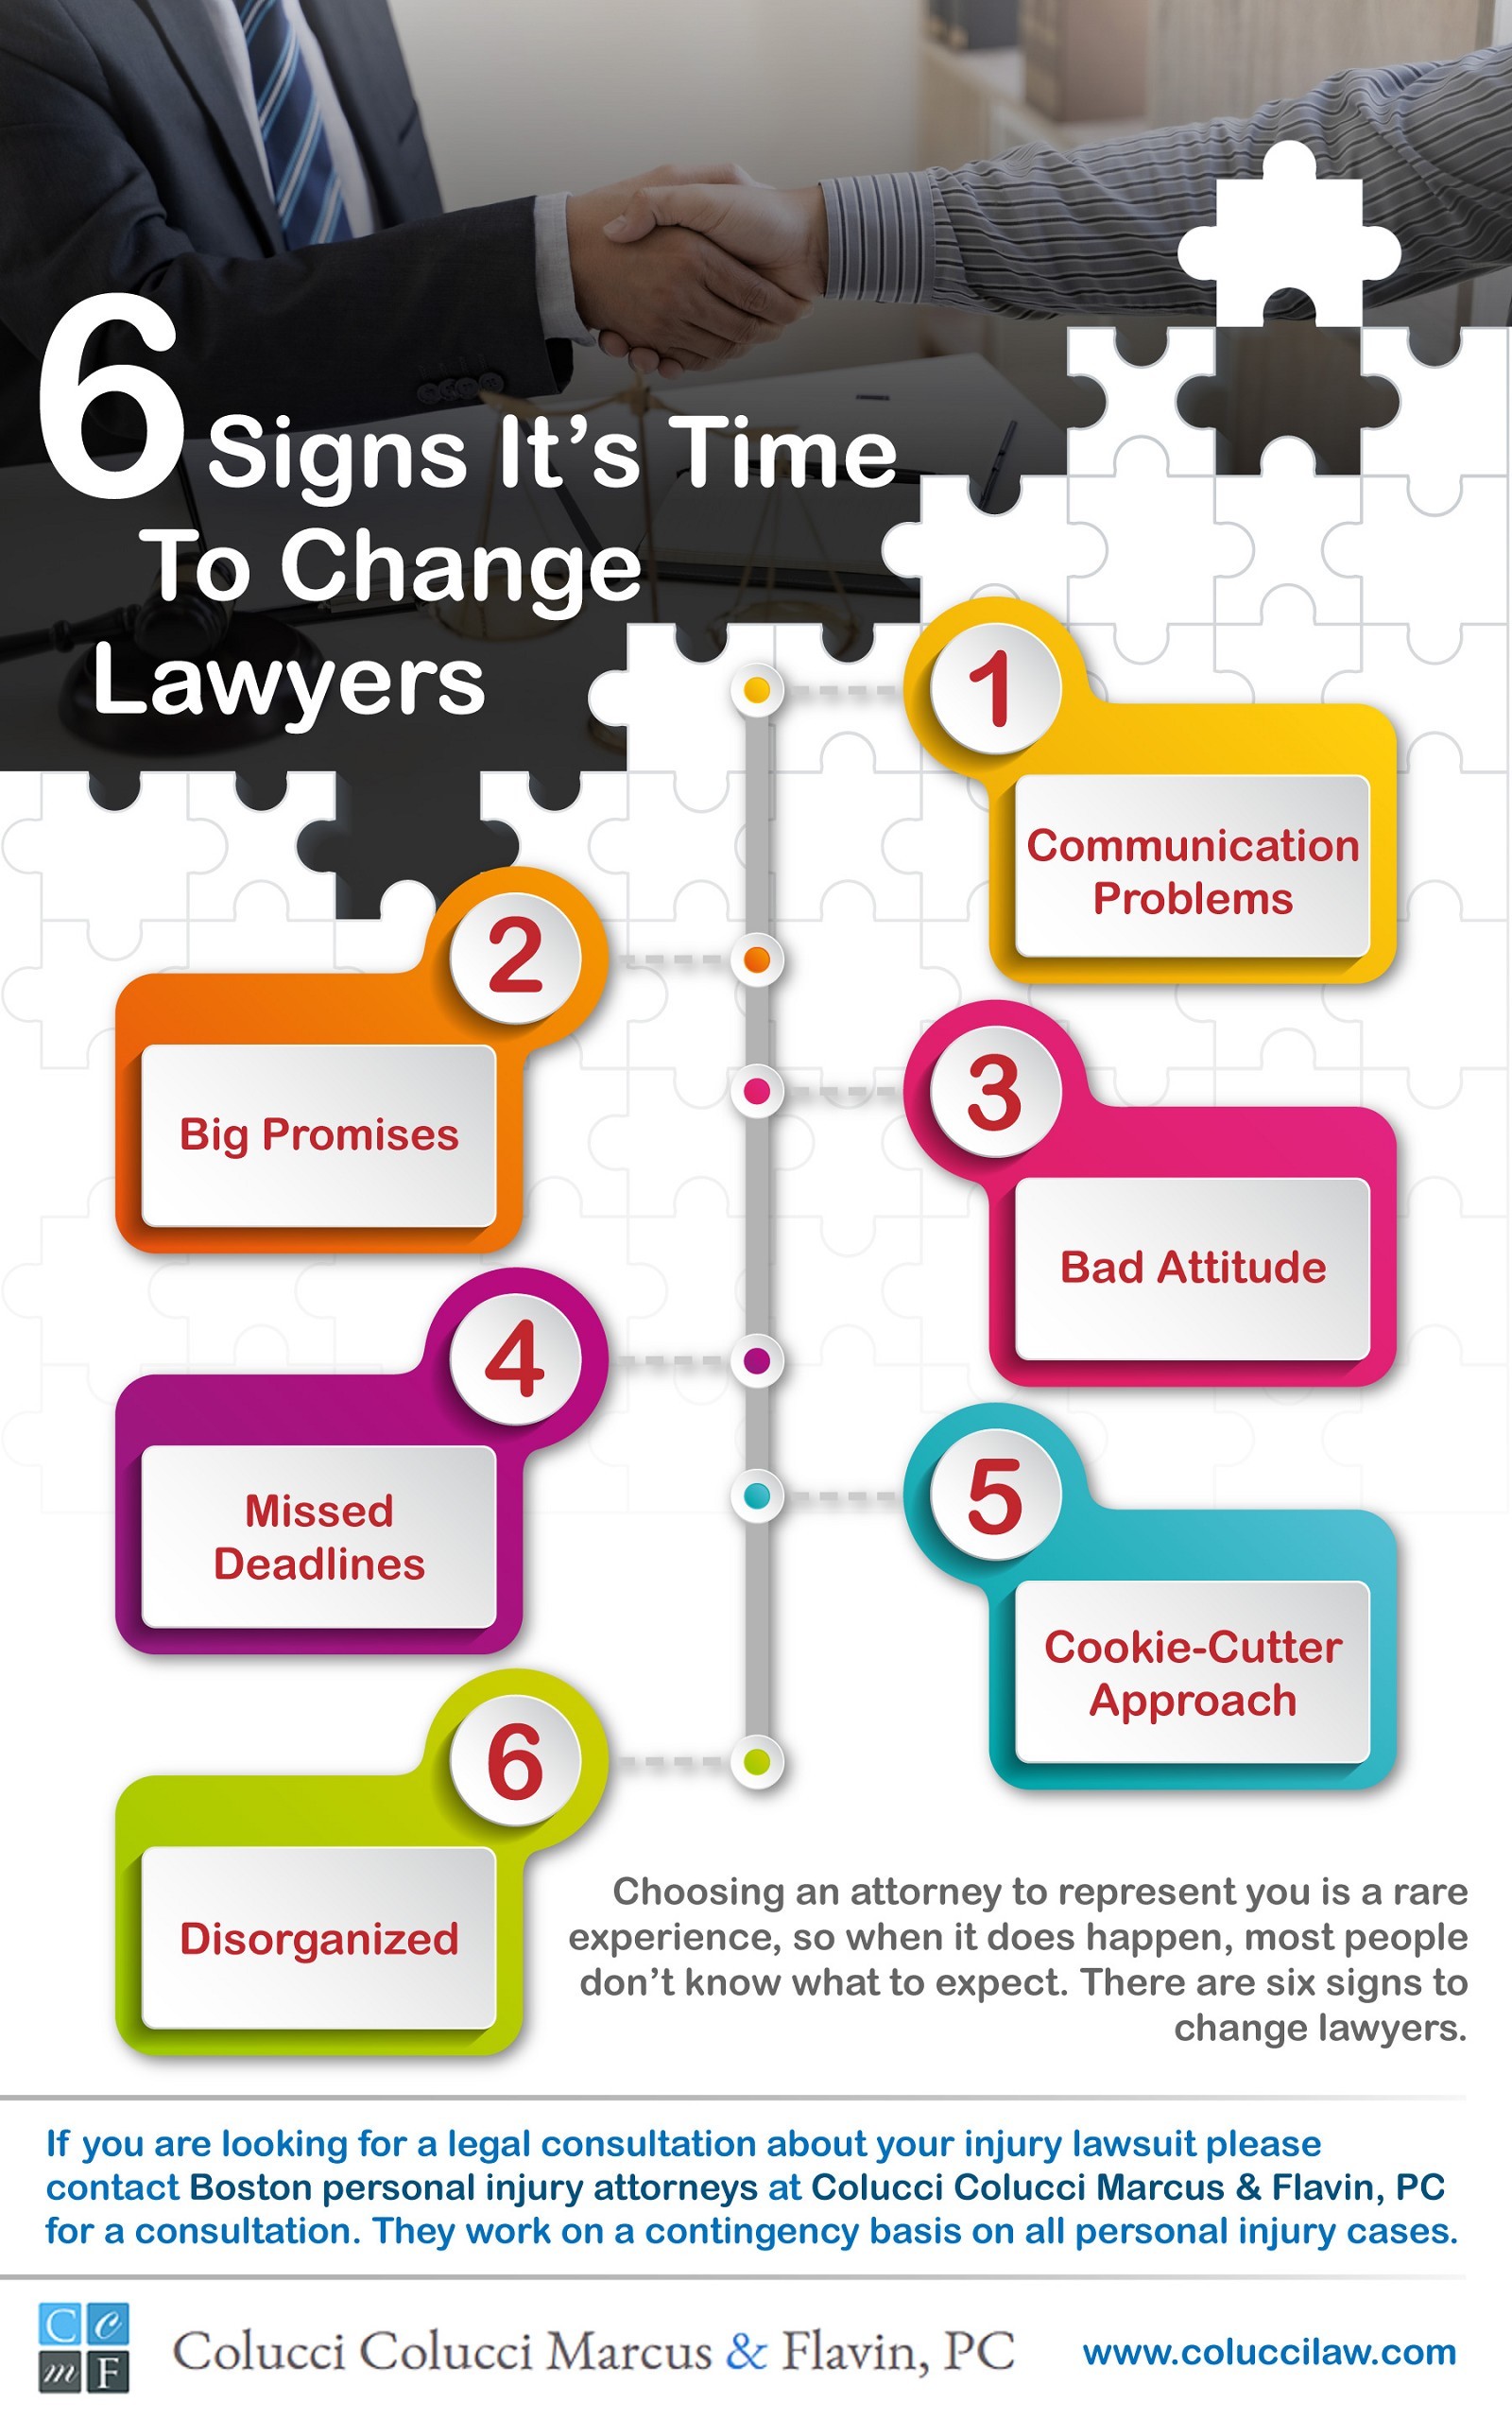 6 Signs It’s Time To Change Lawyers